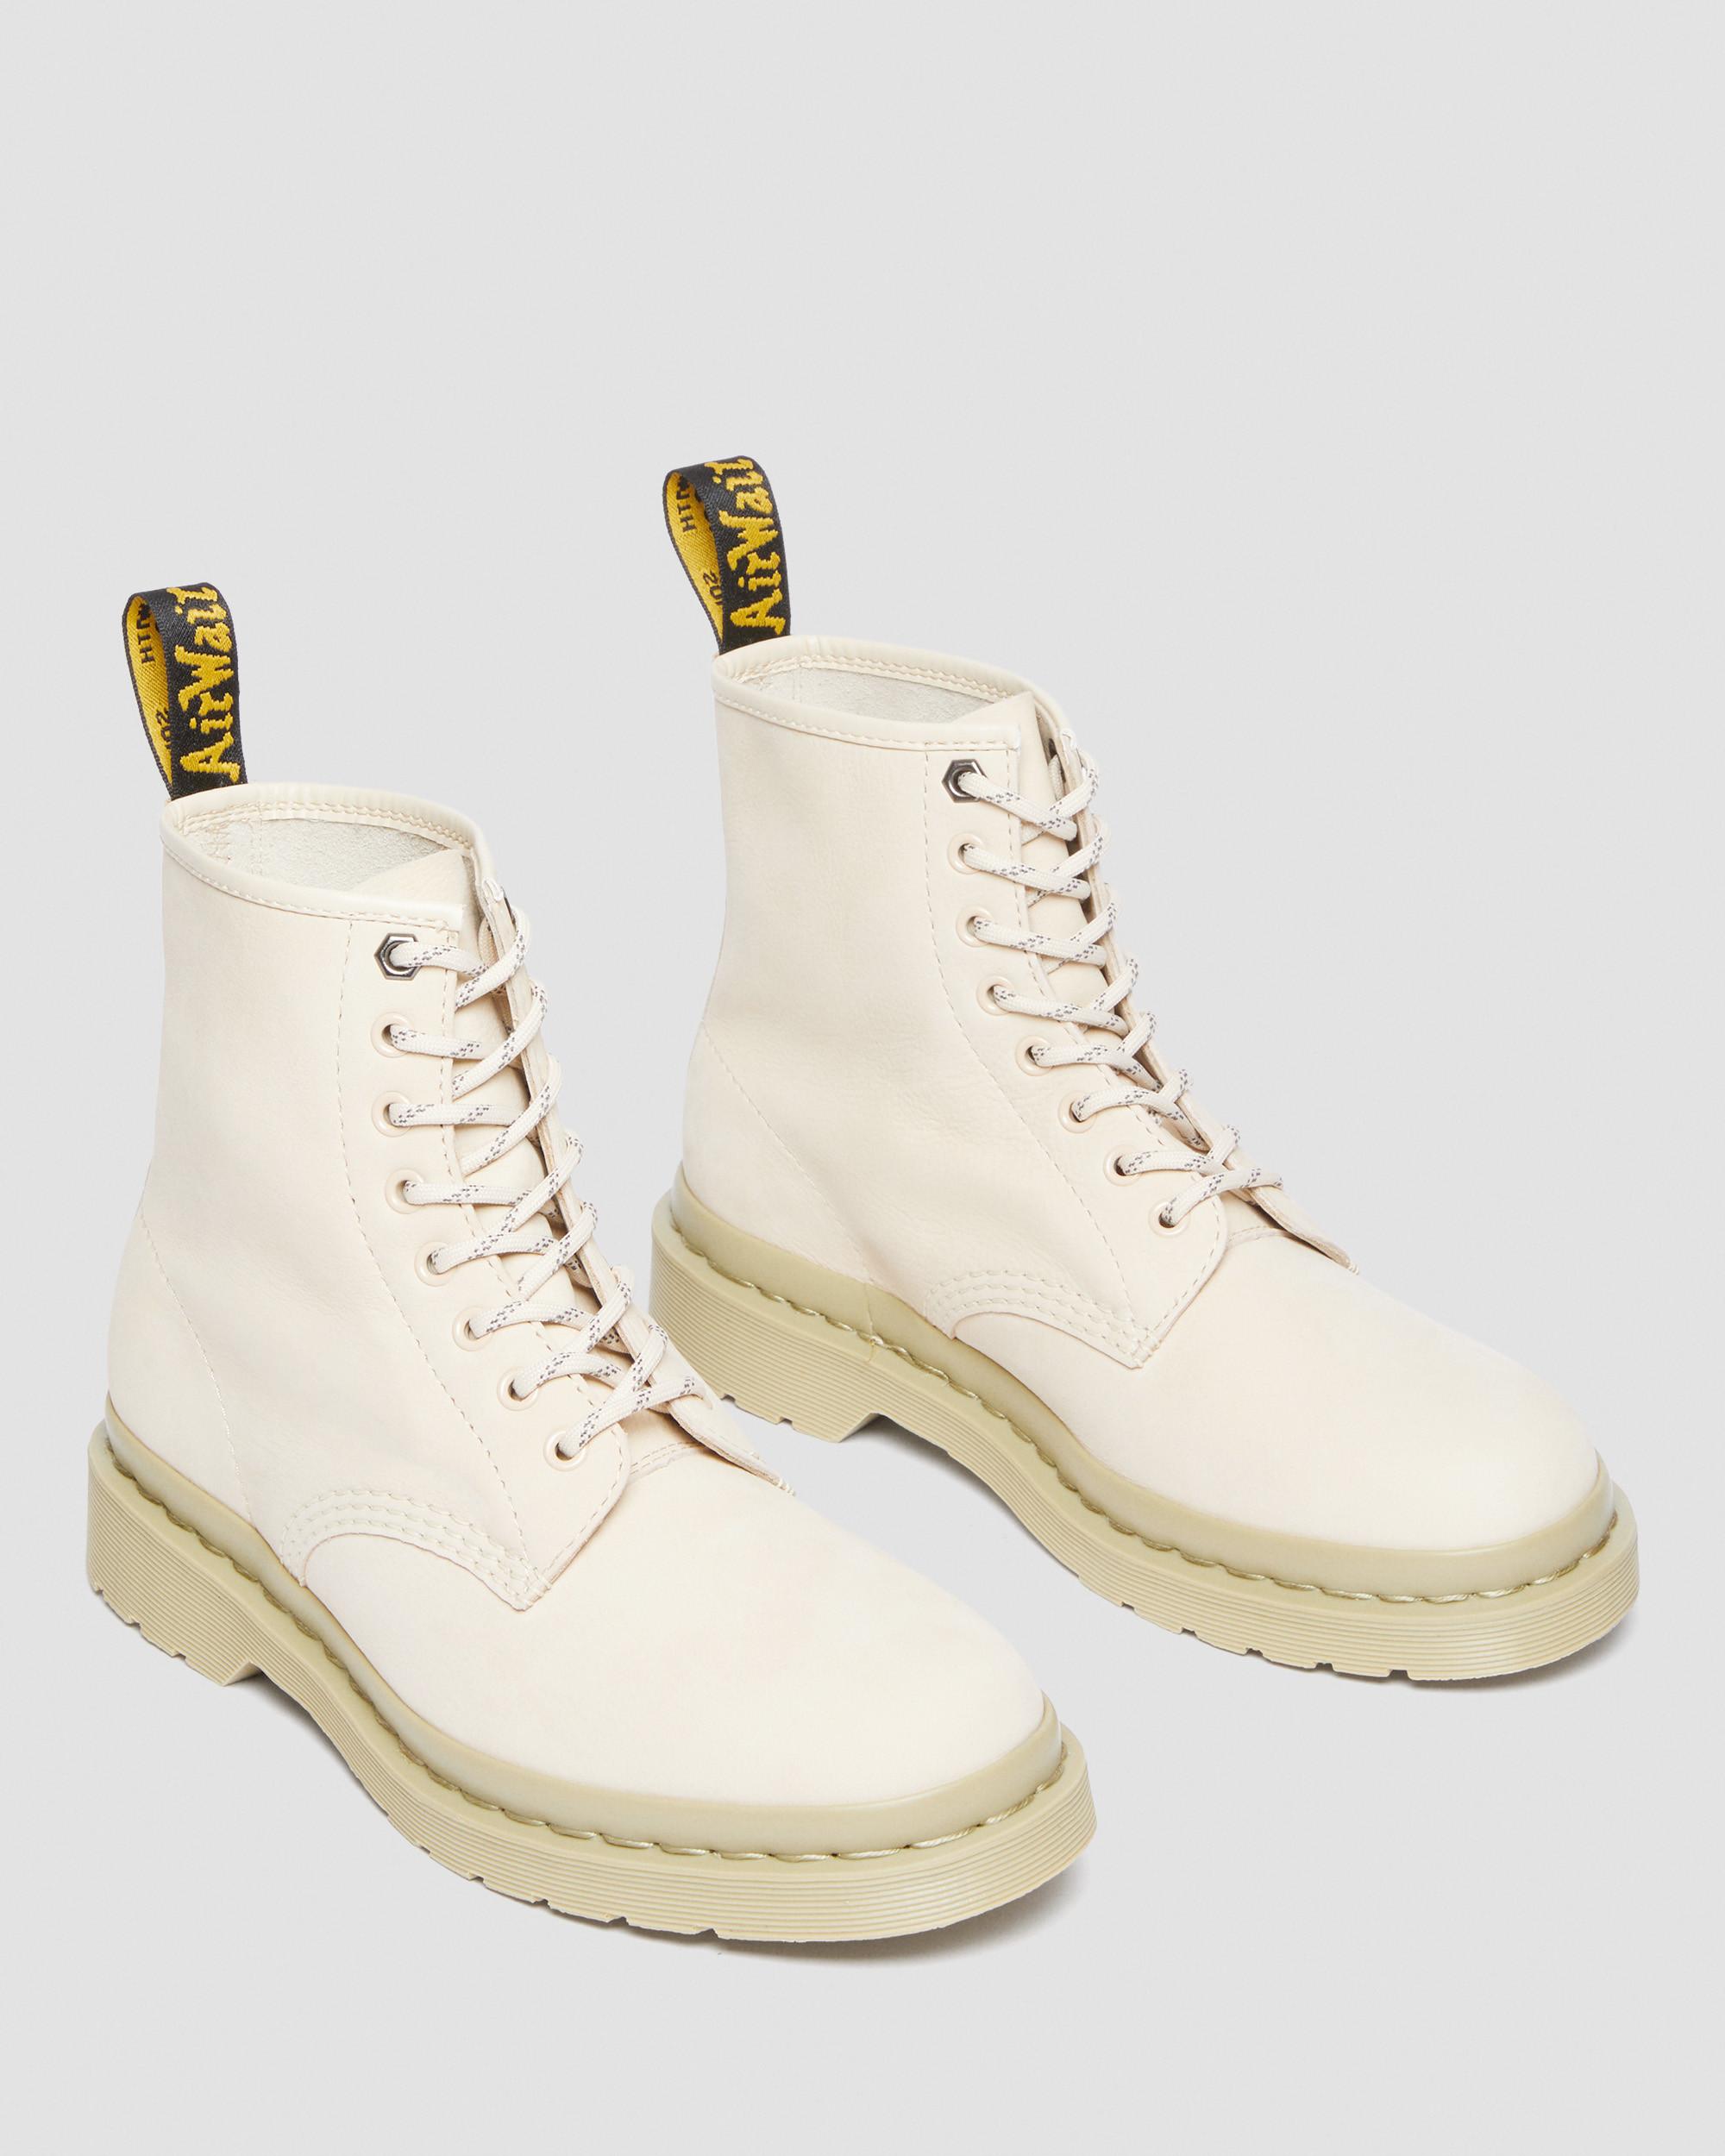 Doc Martens review: Are the 1460 Pascal Virginia boots comfortable